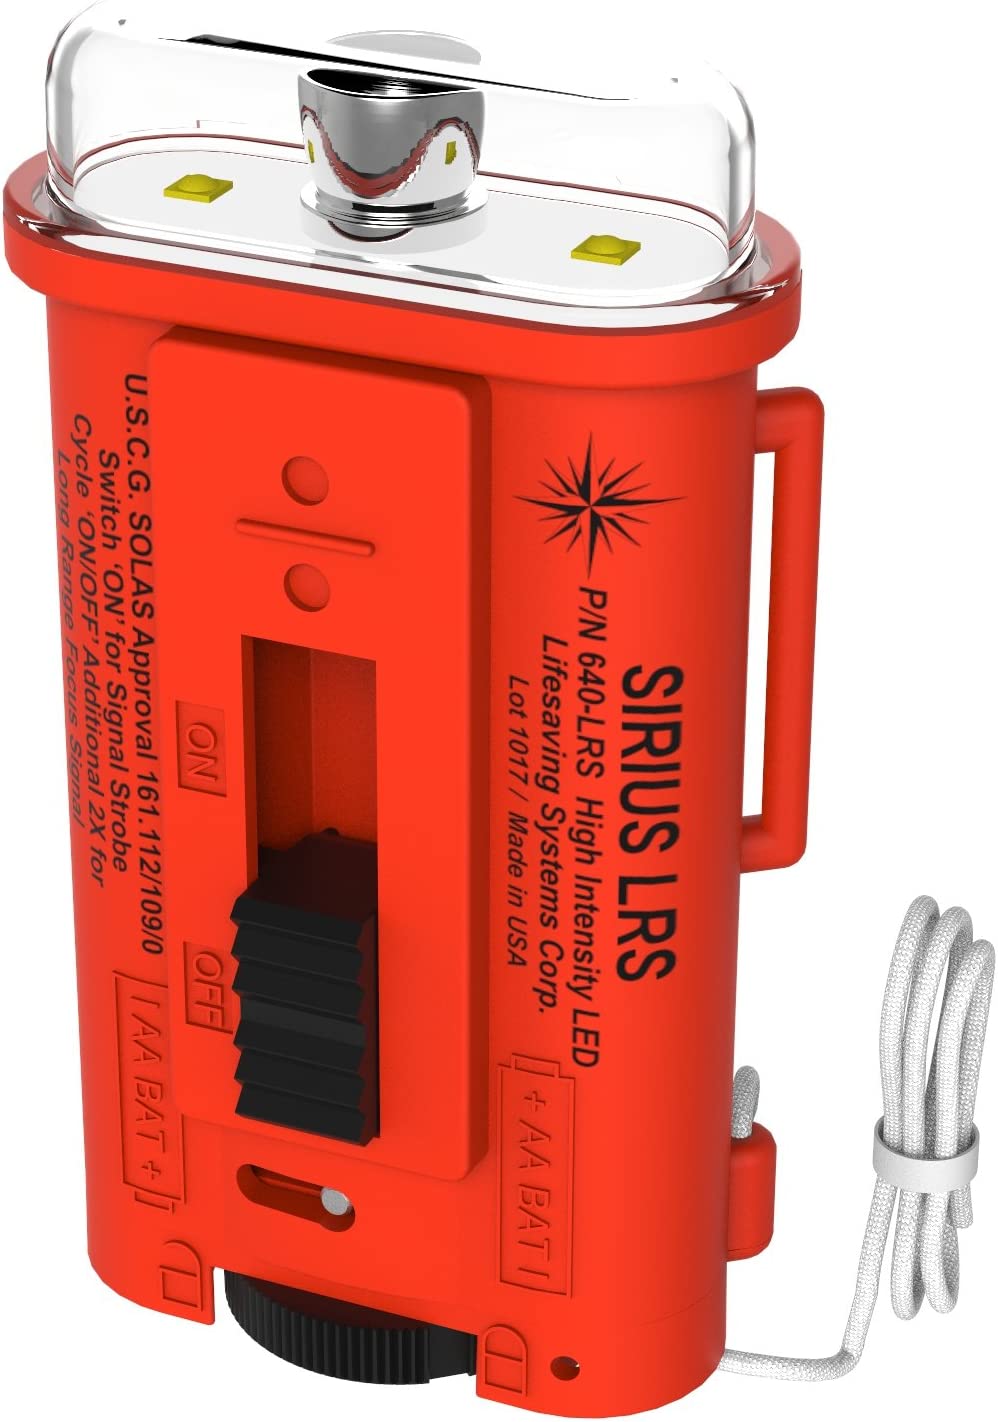 Lifesaving Systems Corp Sirius Long Range LED Strobe Light – USCG Approved Signaling Strobe – Does NOT Replace Flares, Exceeds Solas Requirements – Made in USA